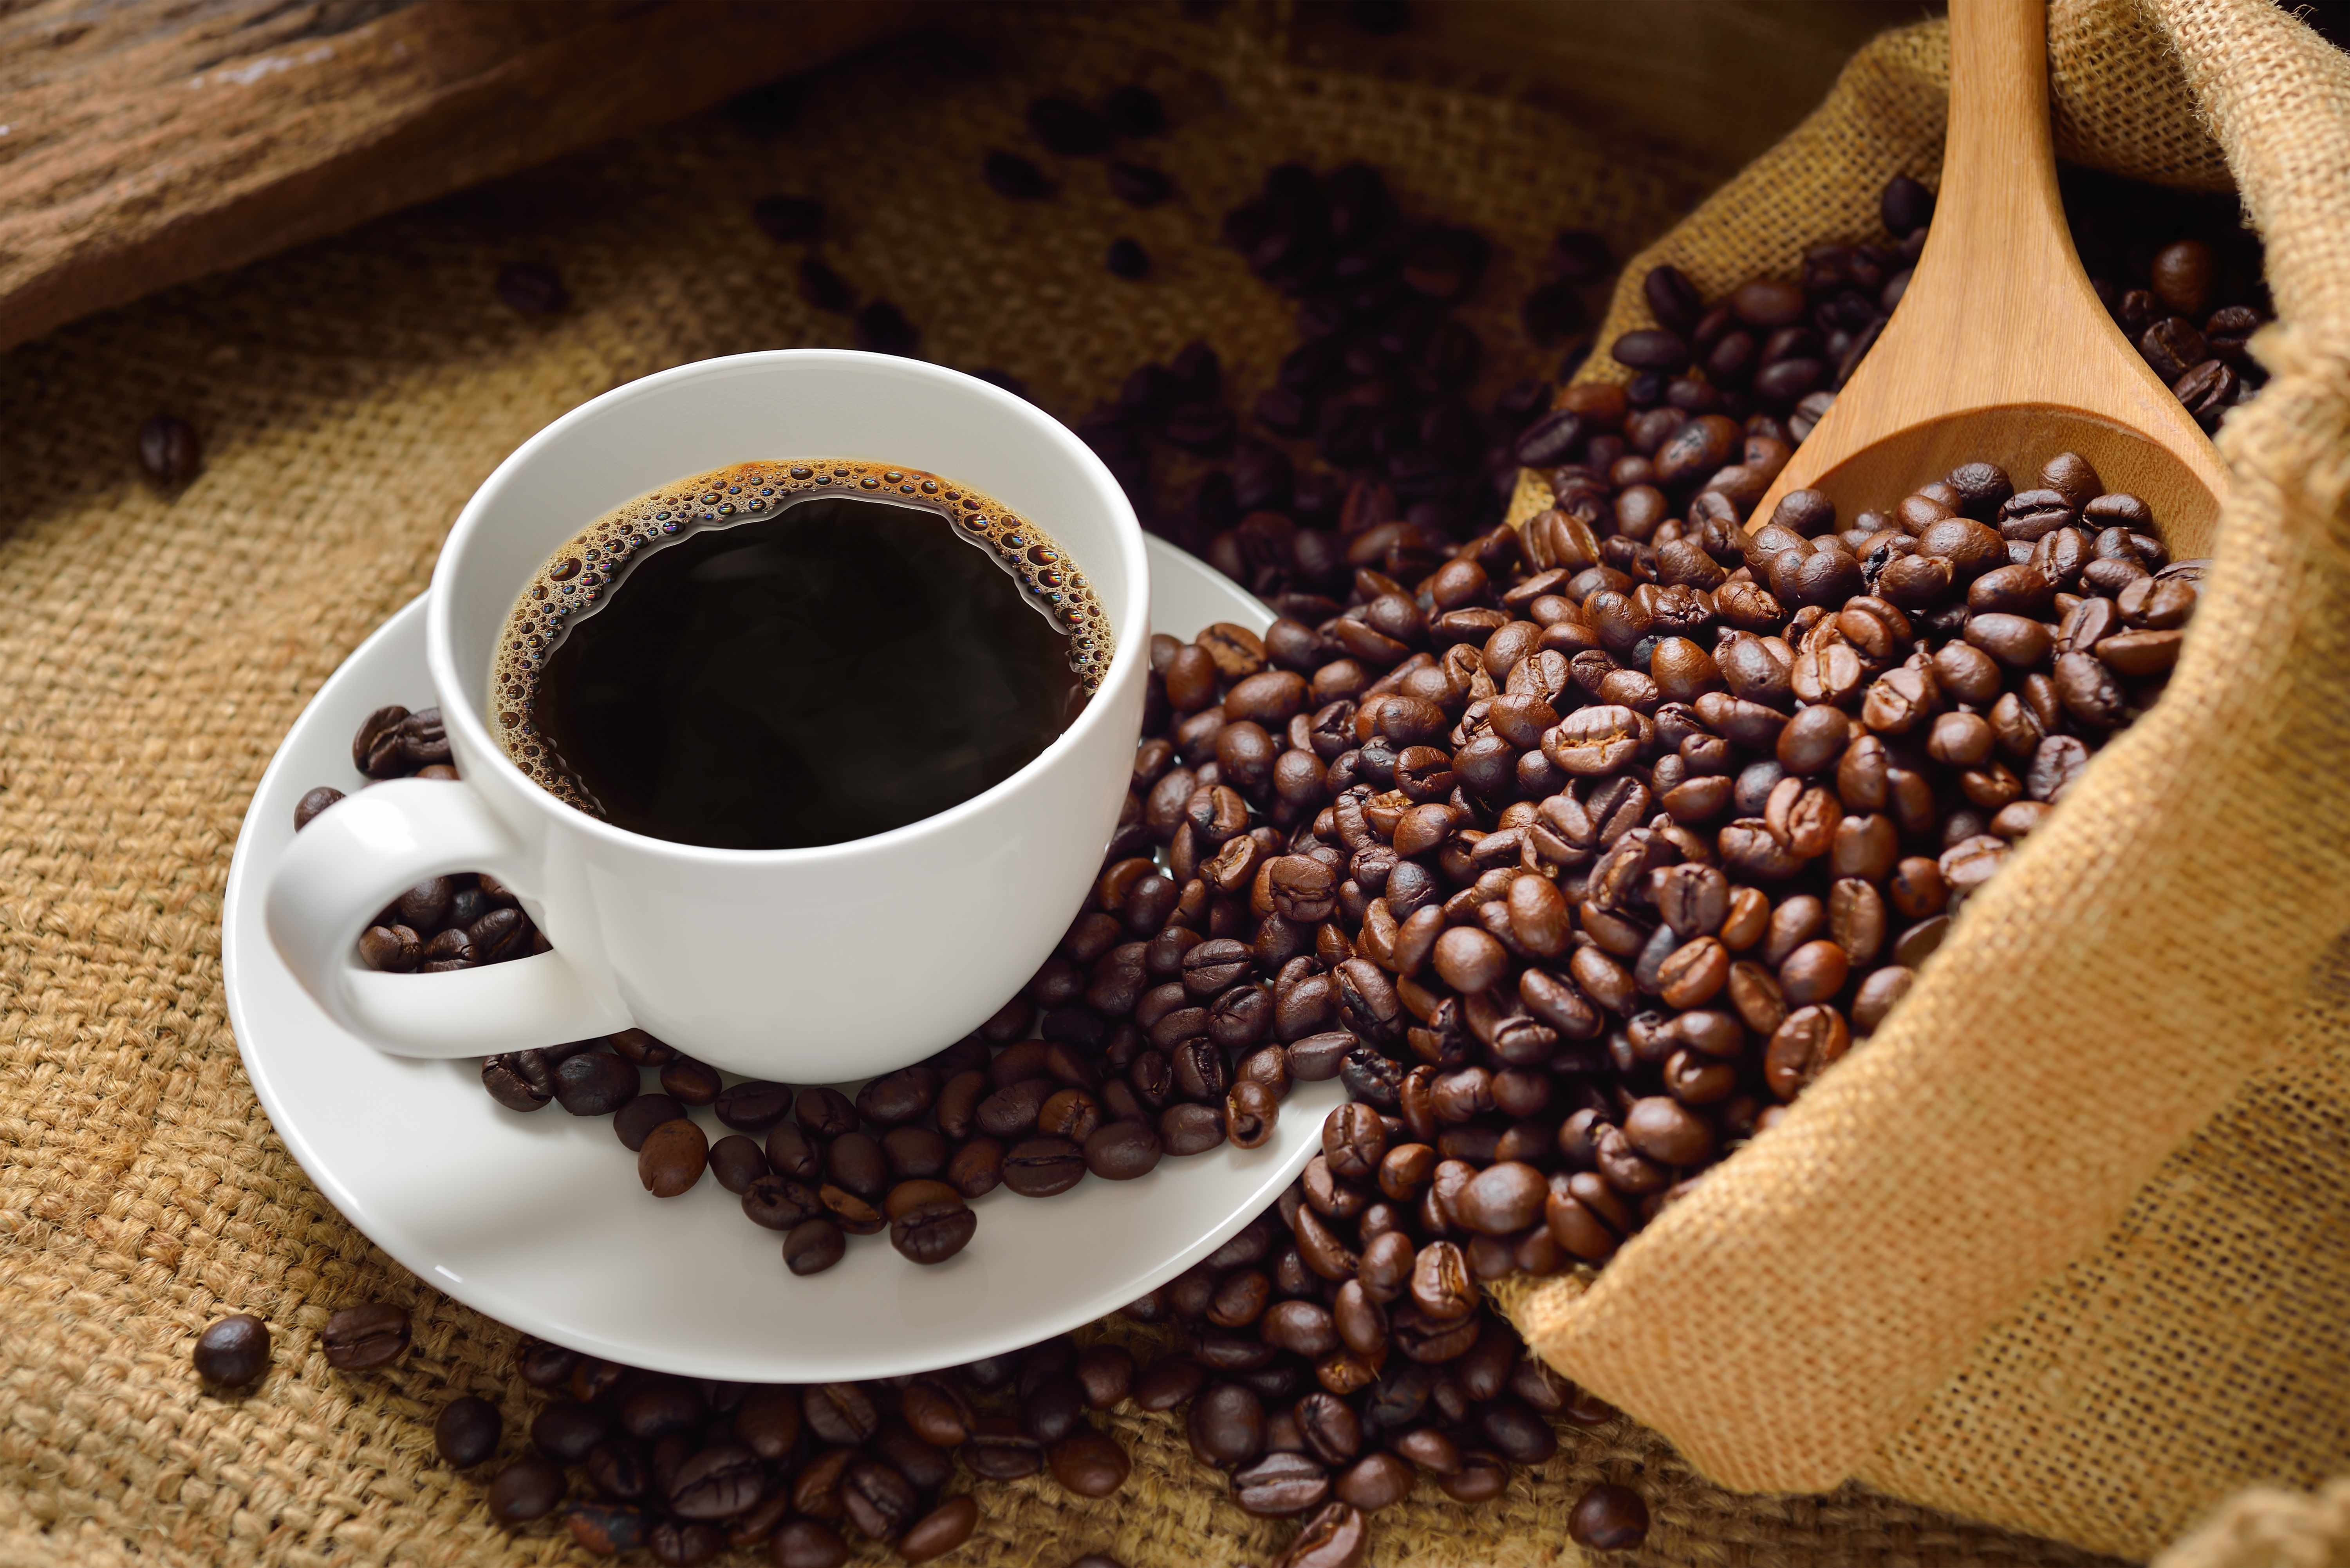 a cup of coffee on a burlap cloth and coffee beans spilling around the table